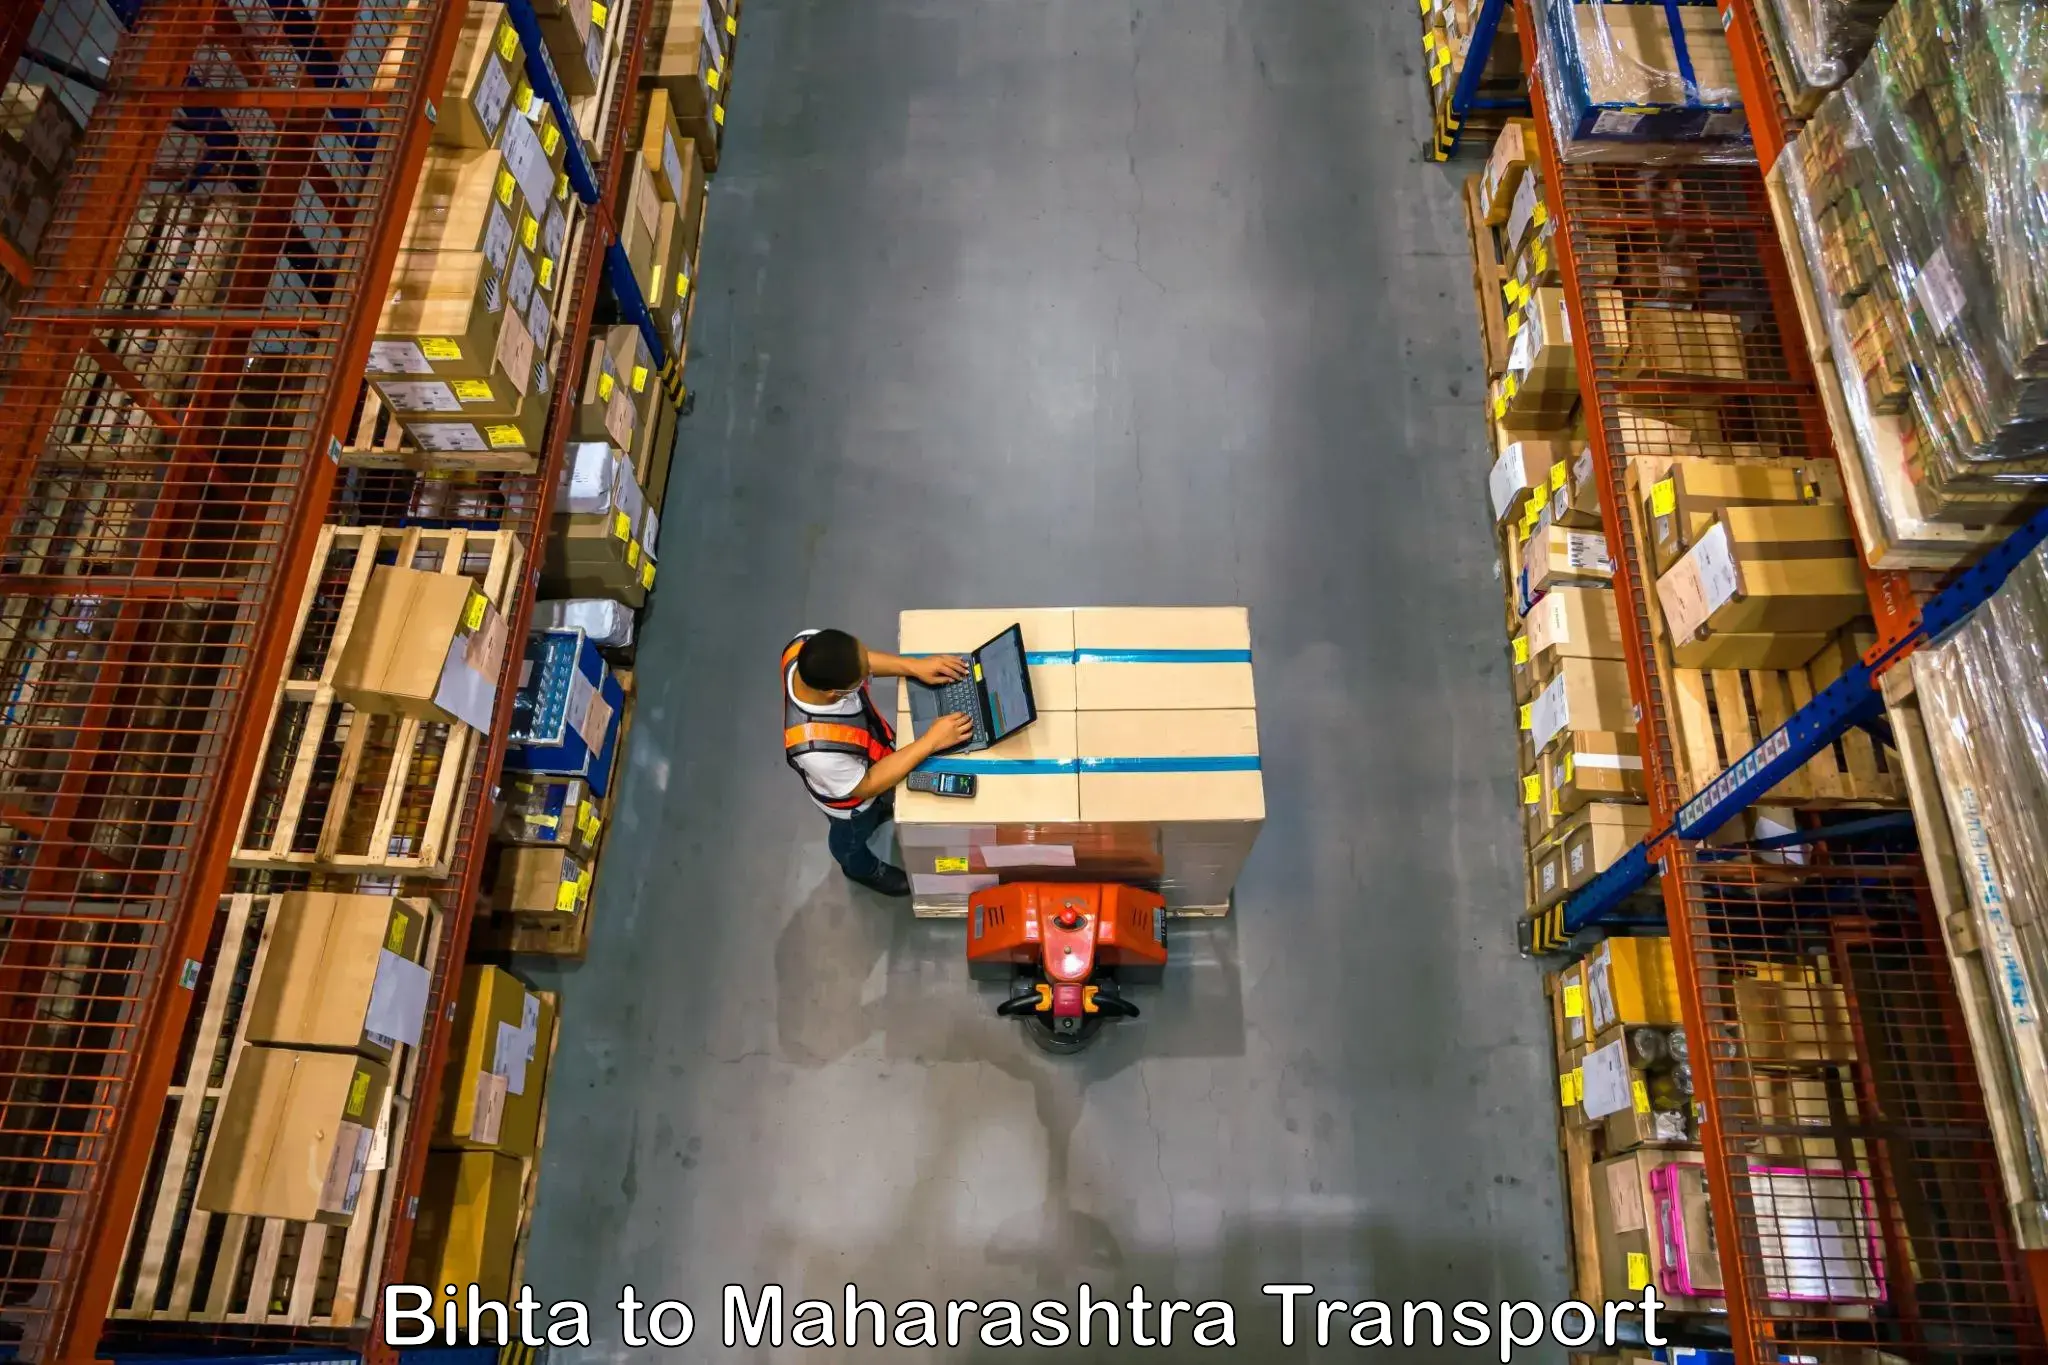 Pick up transport service in Bihta to Wardha